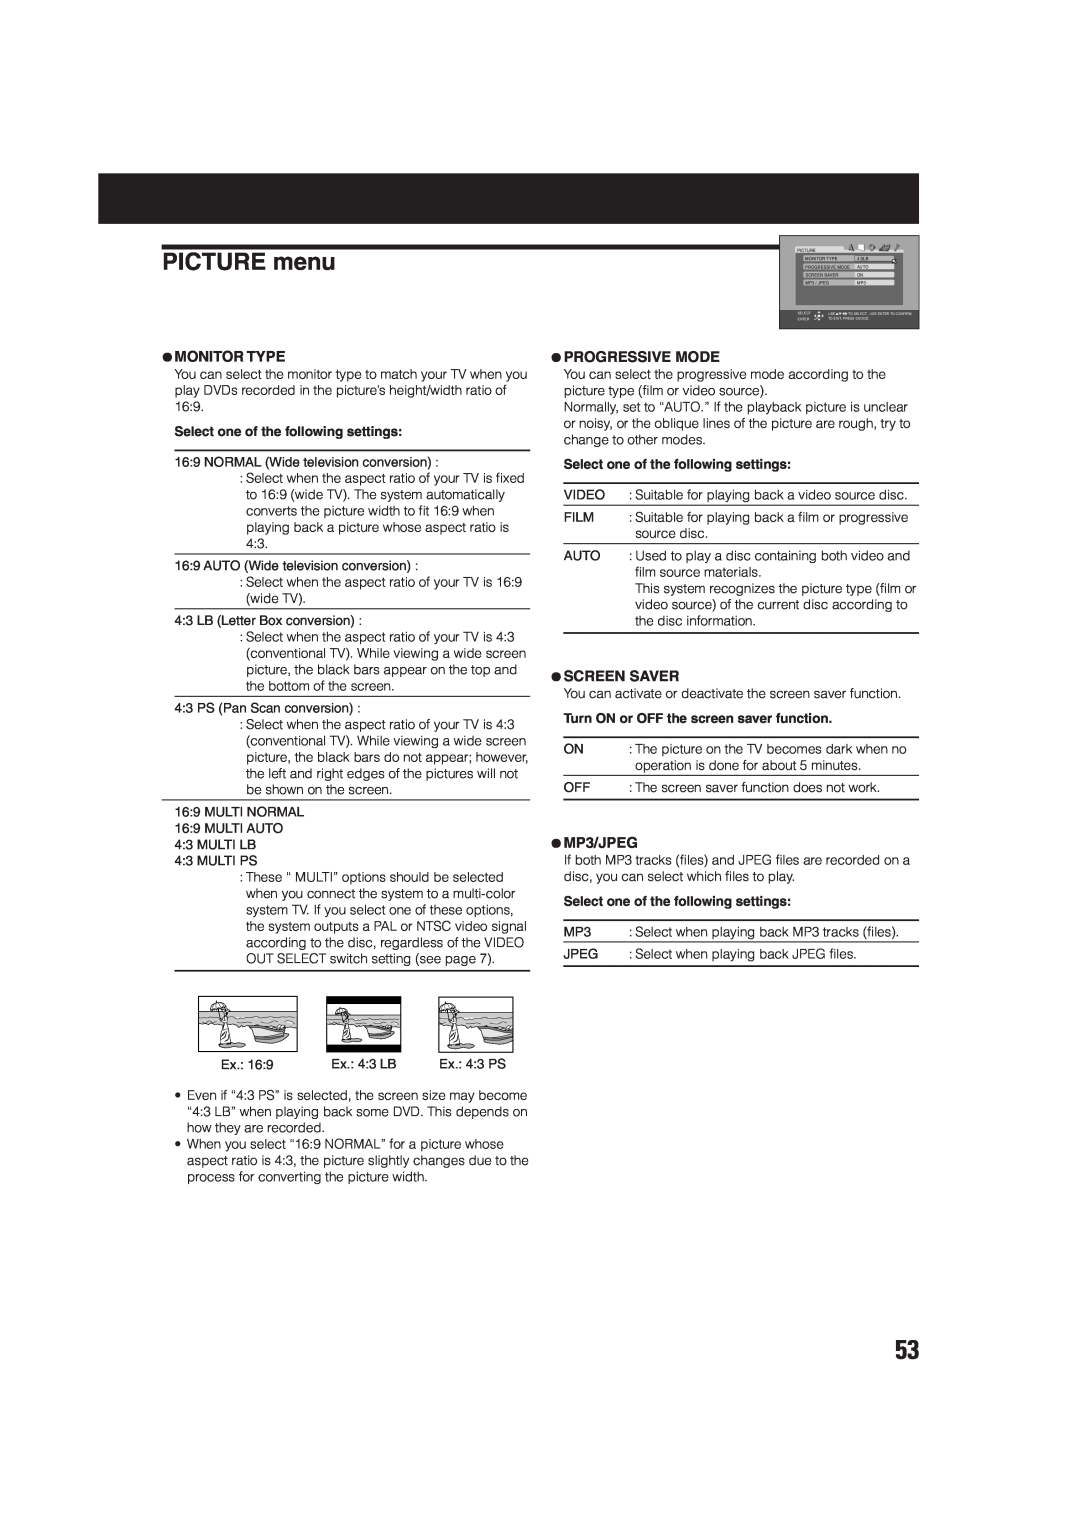 JVC TH-A75 PICTURE menu, ¶Monitor Type, ¶Progressive Mode, ¶Screen Saver, ¶MP3/JPEG, Select one of the following settings 